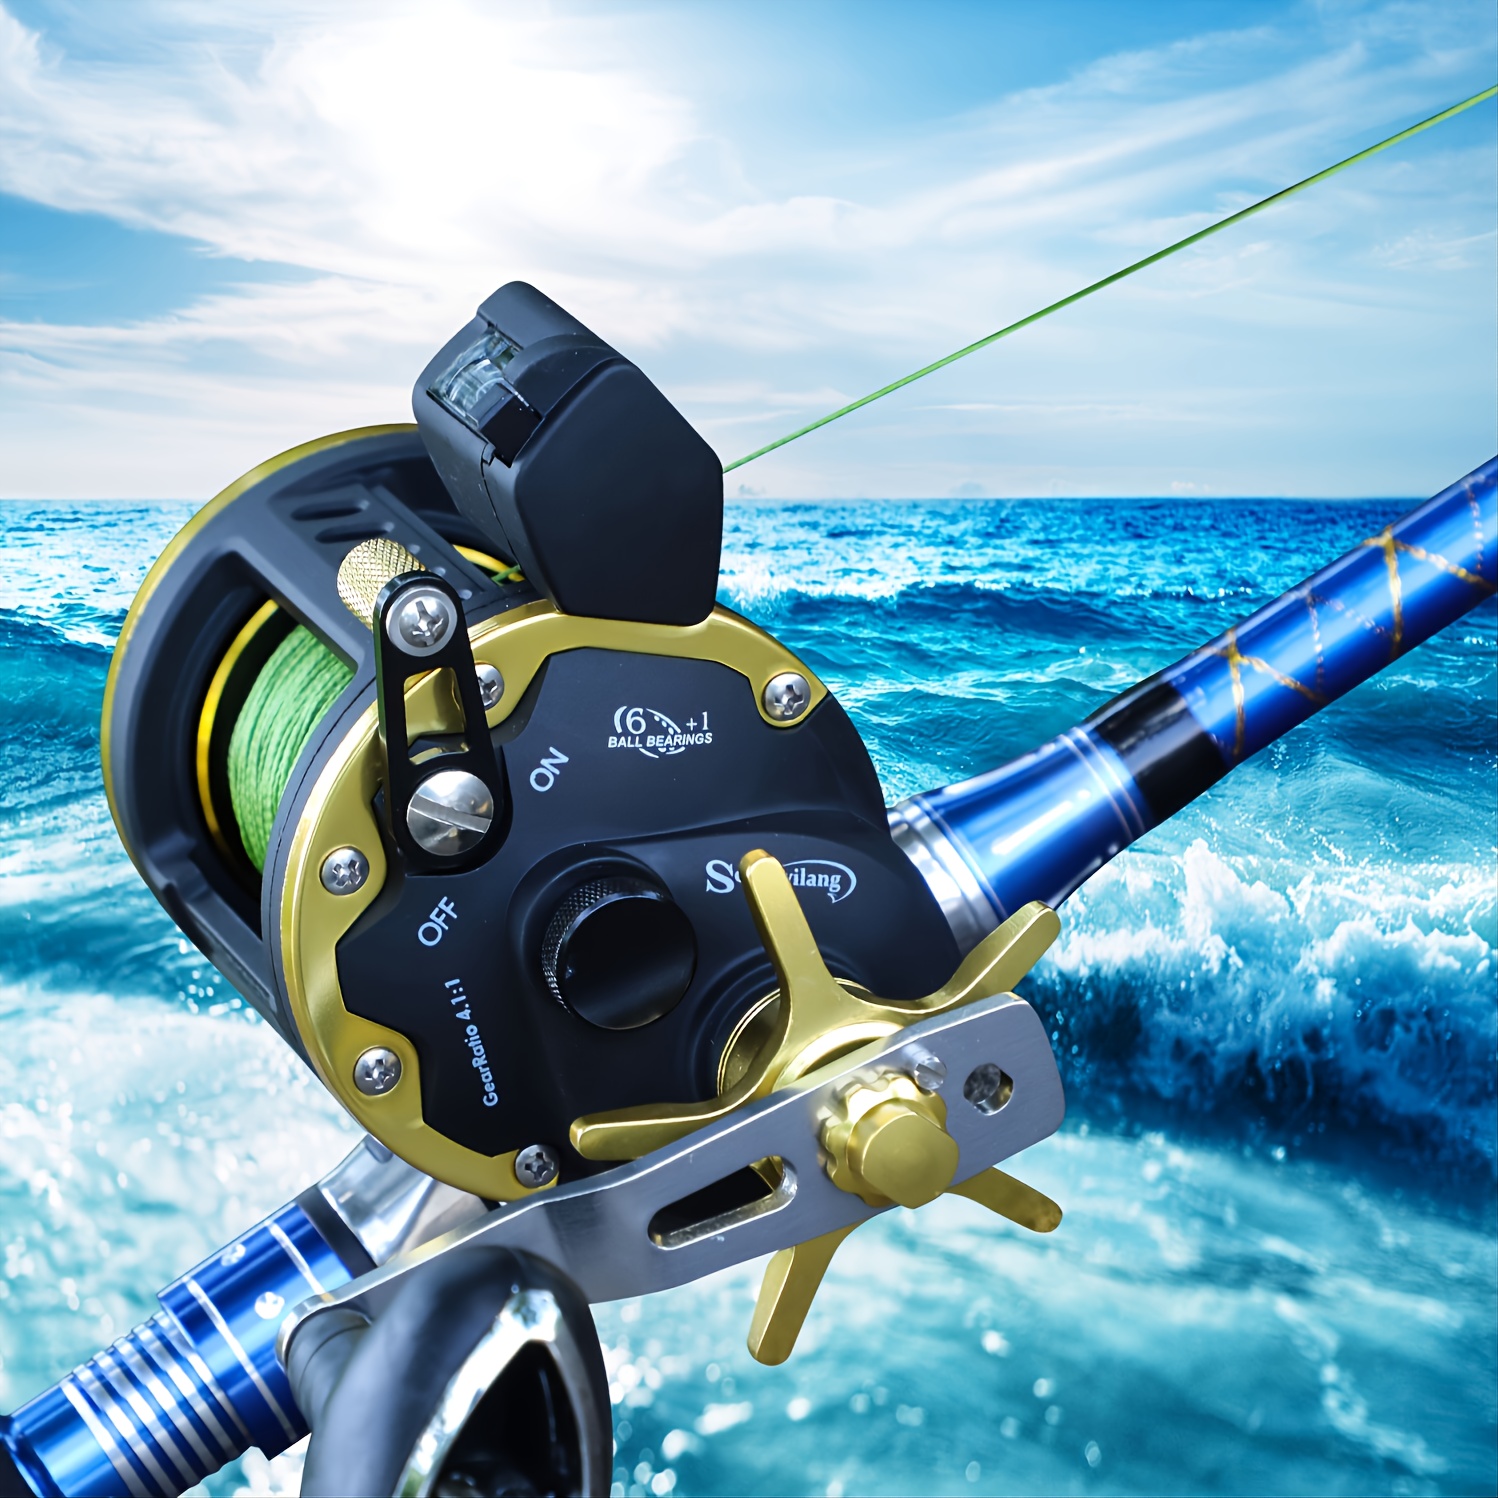 Sougayilang Baitcasting Fishing Reel - Saltwater Level Wind Reel with 4.1:1  Gear Ratio for Trolling, Drag Reels for Boat and Ocean Fishing - Ideal for